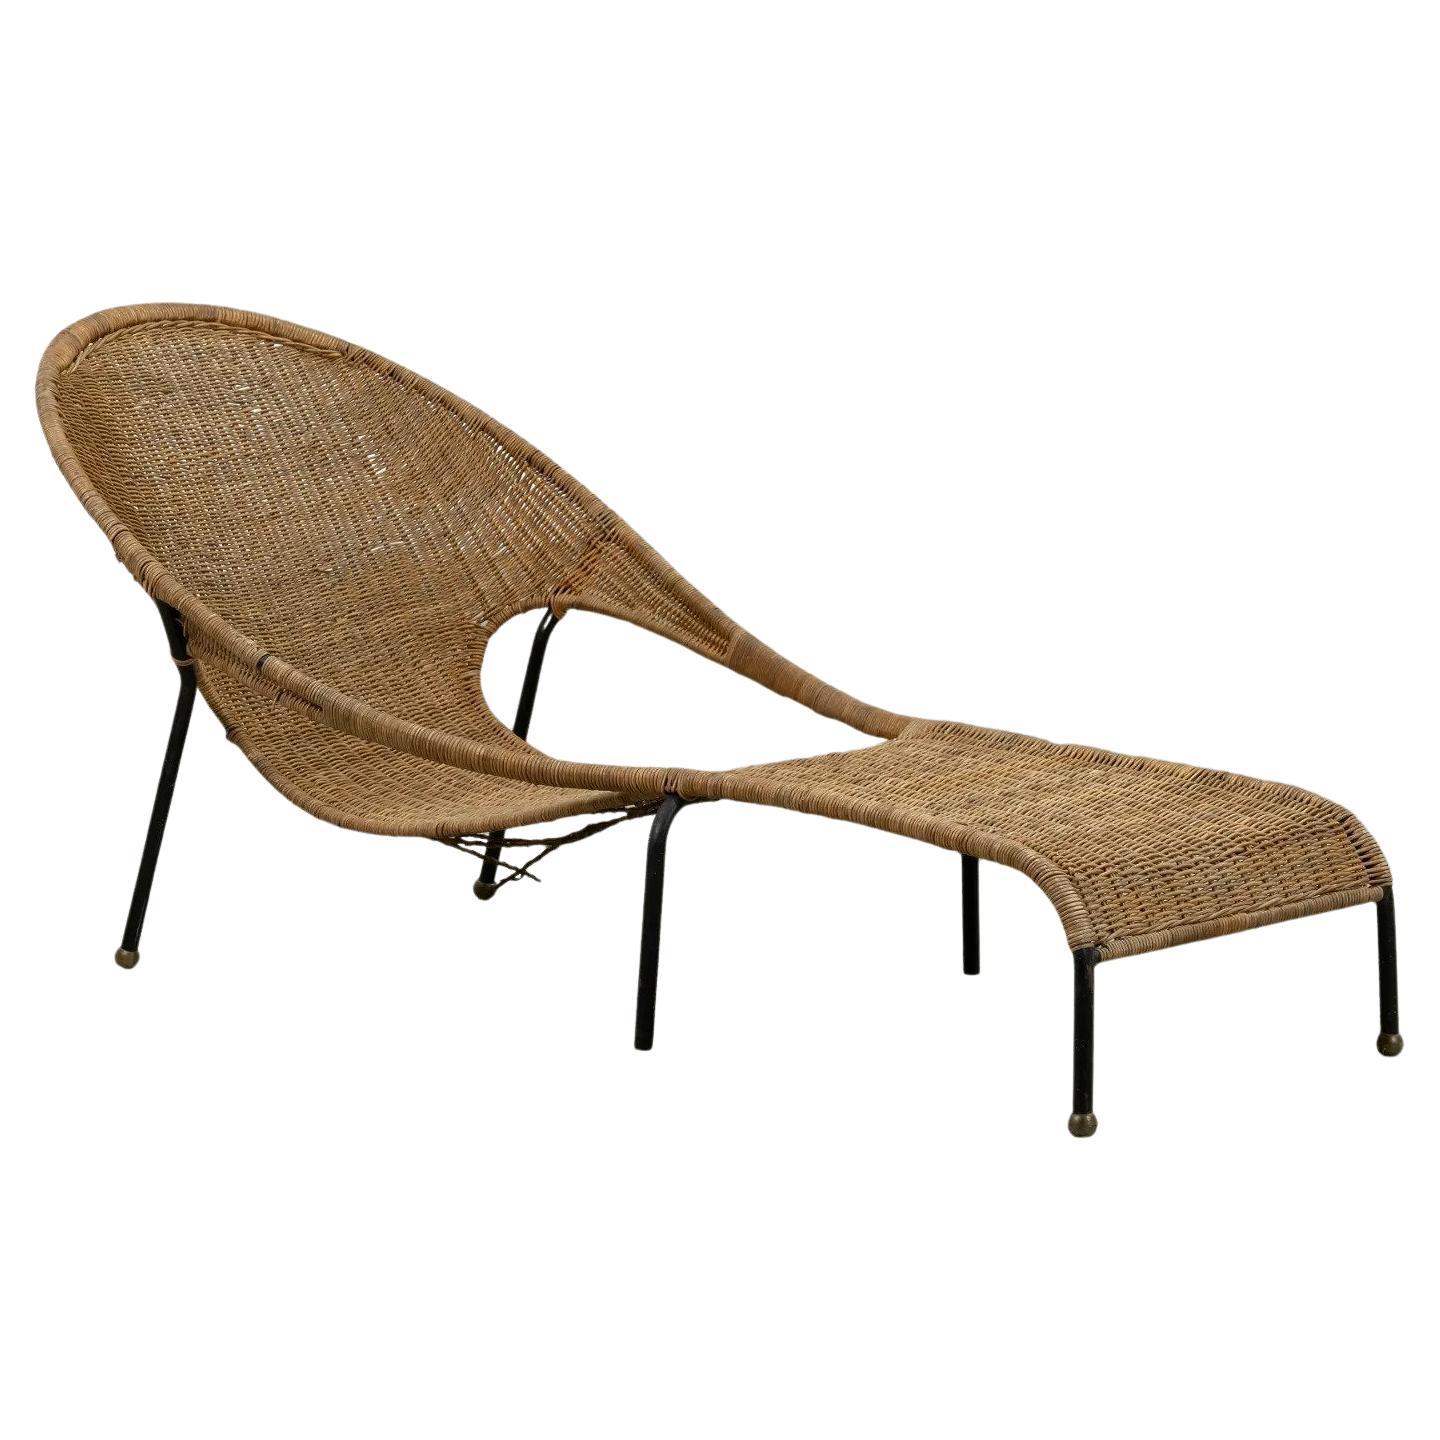 Francis Mair Wicker Chaise Lounge